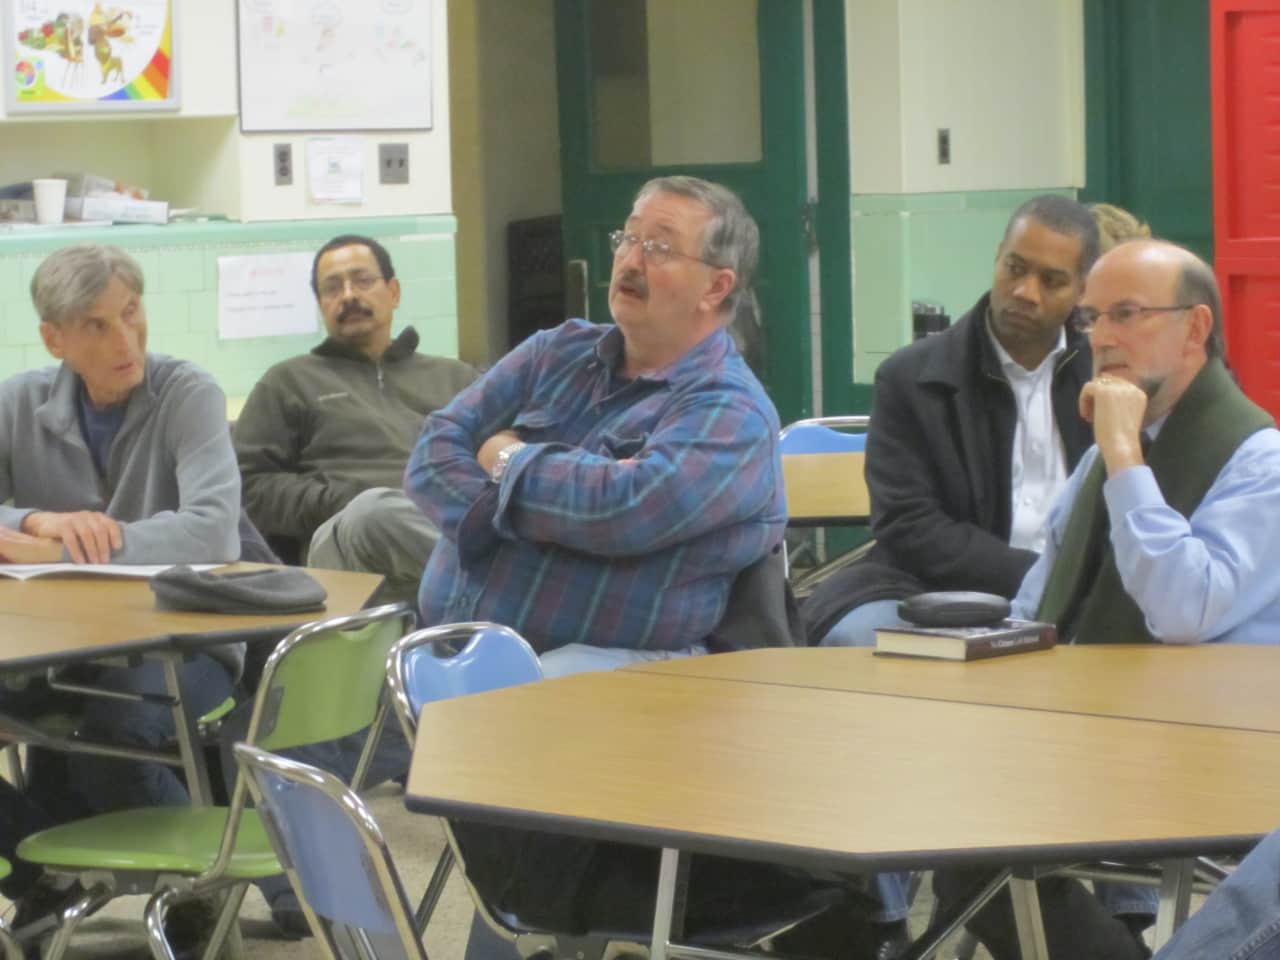 Ossining residents weigh in on the Ossining School District's search for a new superintendent during a meeting Tuesday night at Roosevelt School.